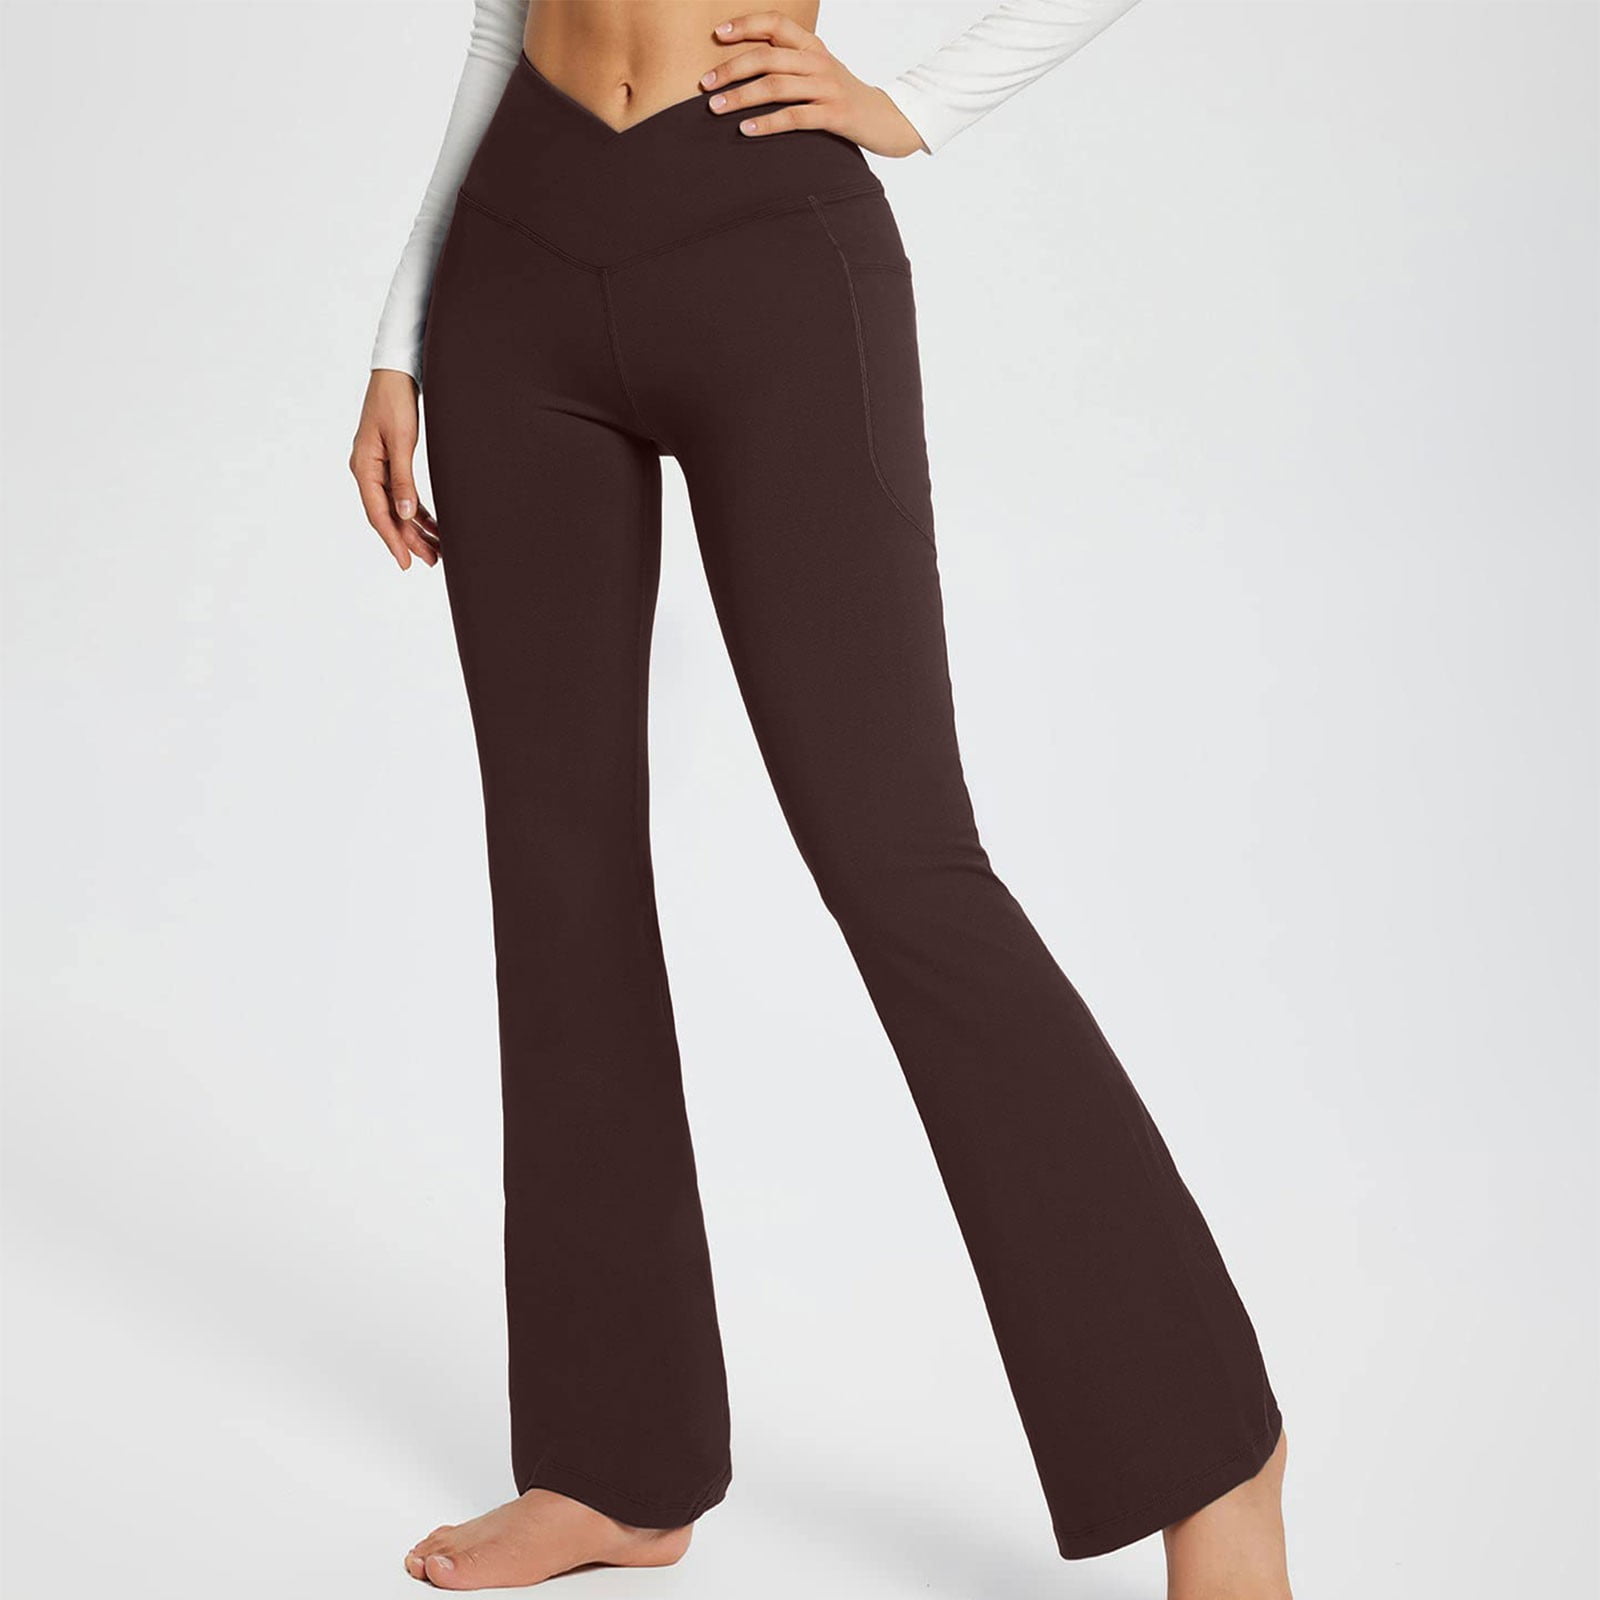  Women's Fold Over Flare Yoga Pants Y2k Low Rise Bell